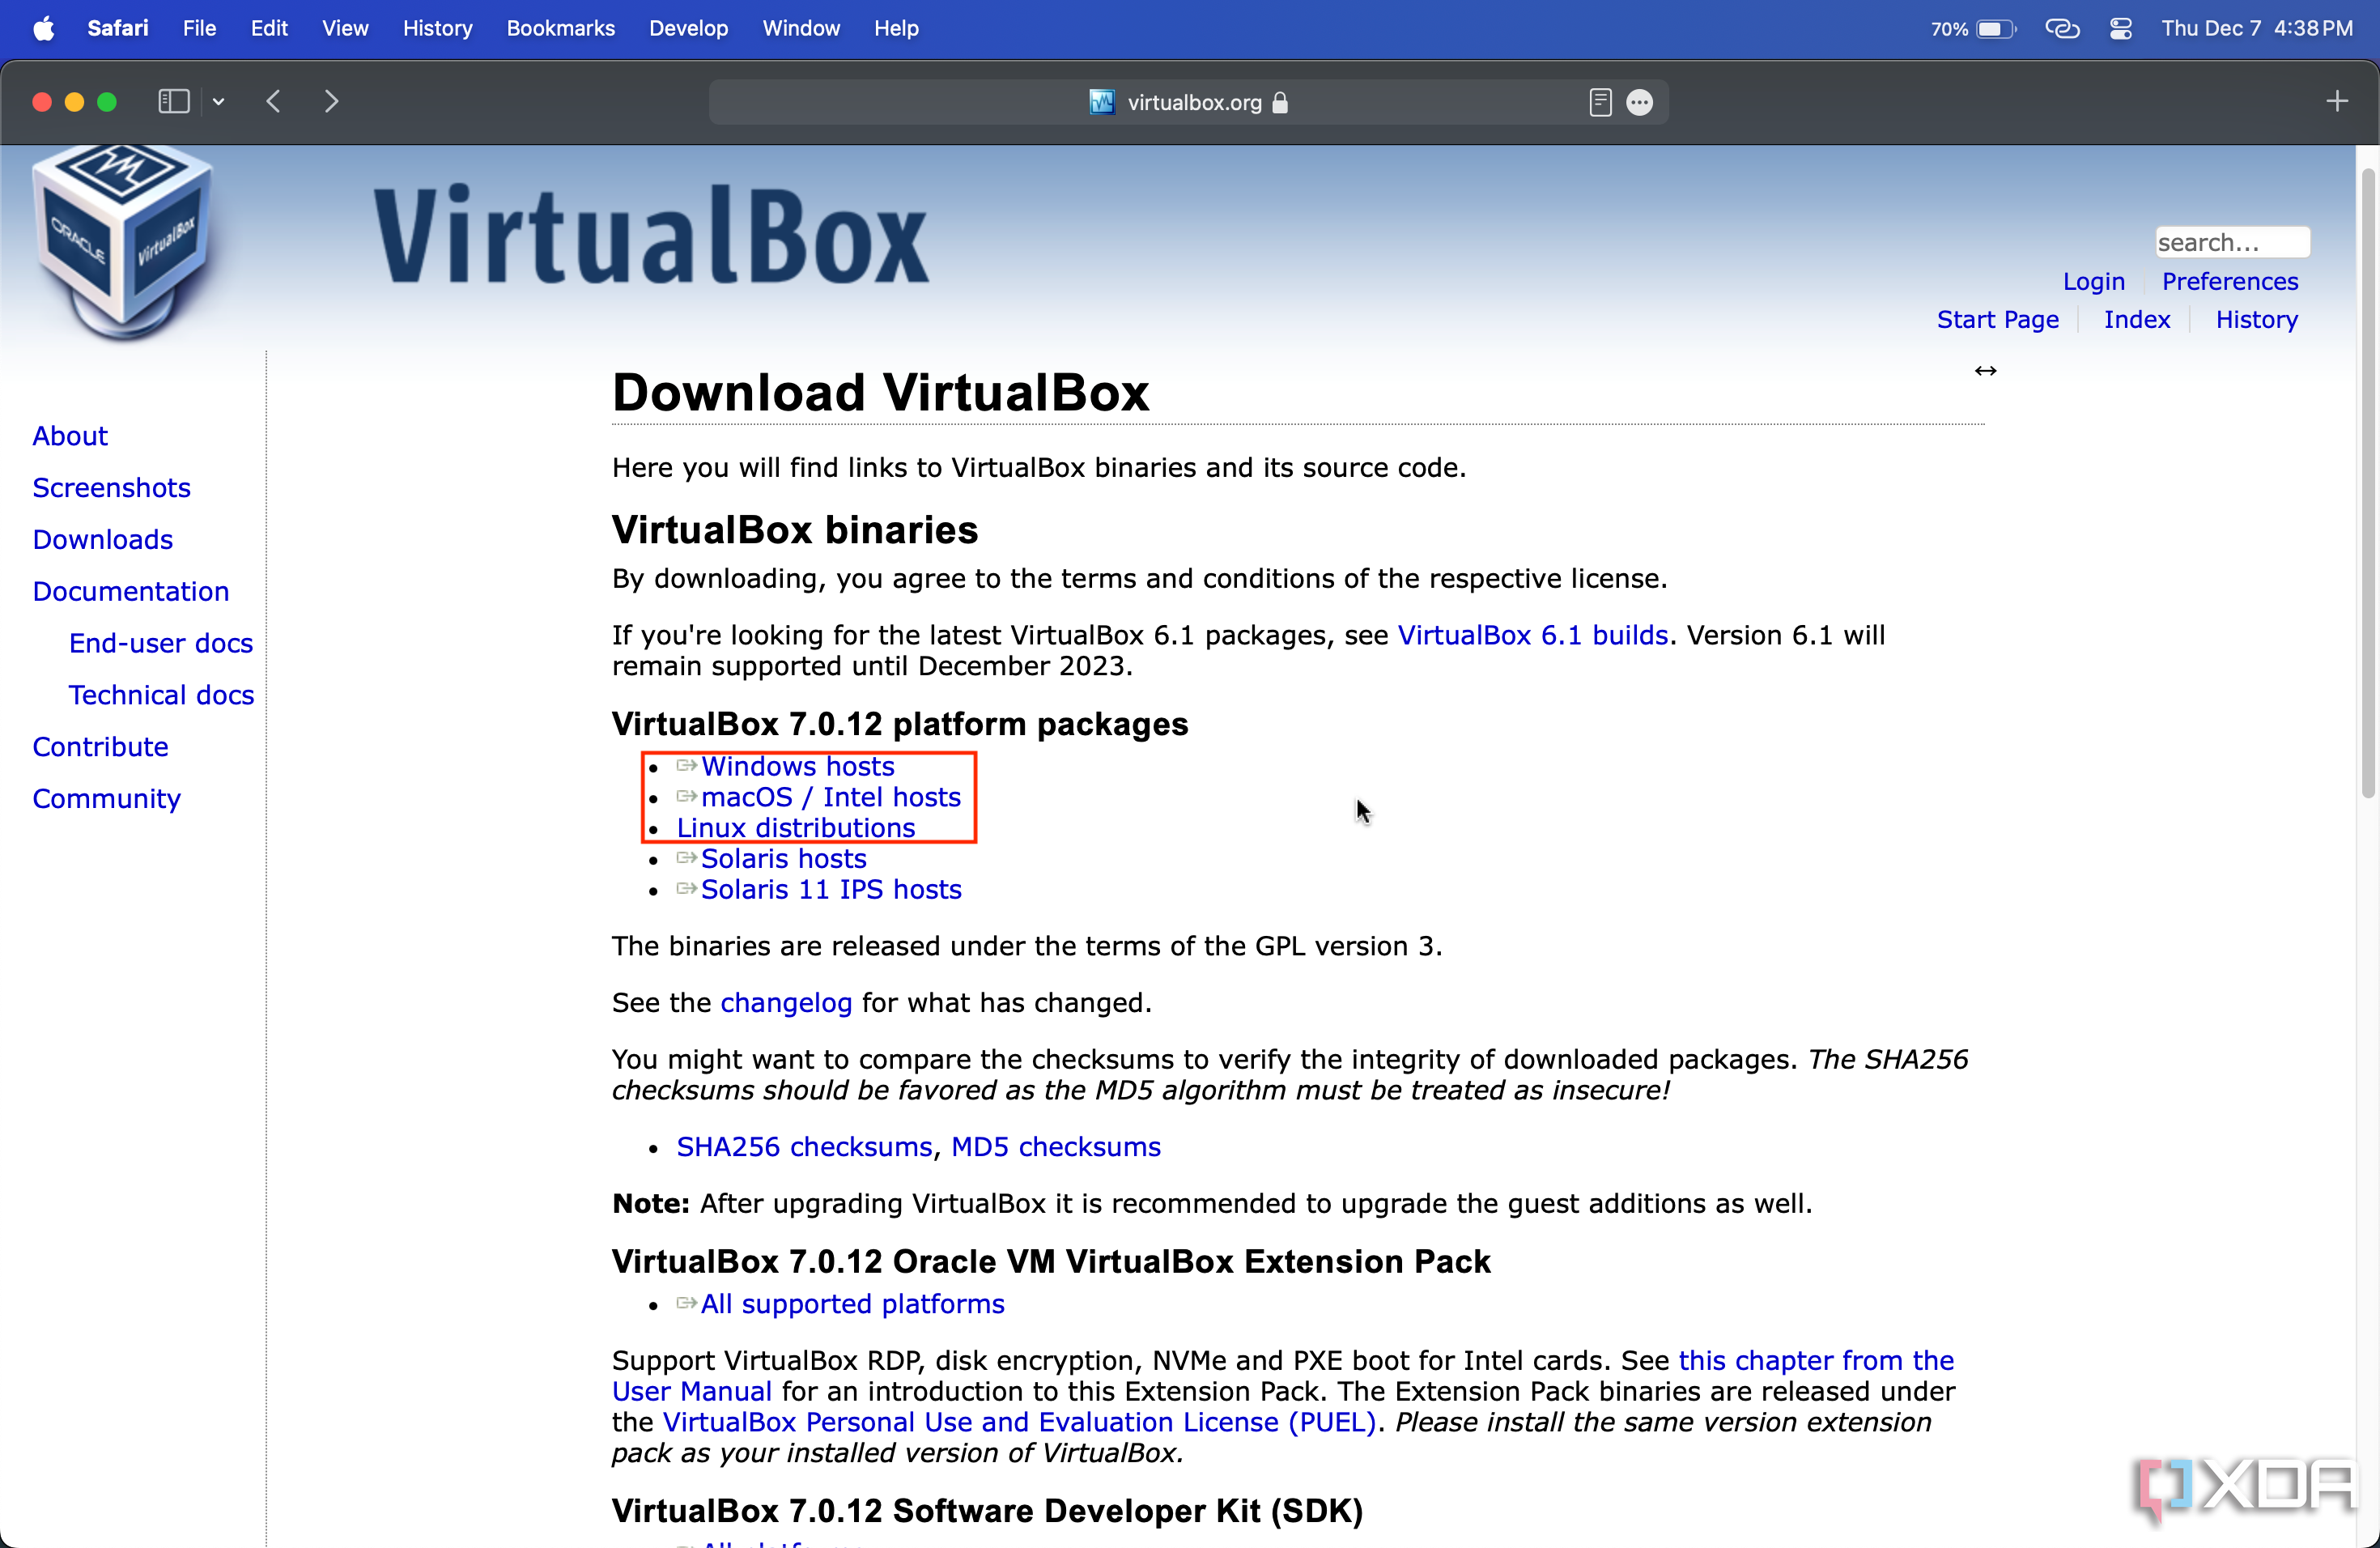 virtualbox stable release download page